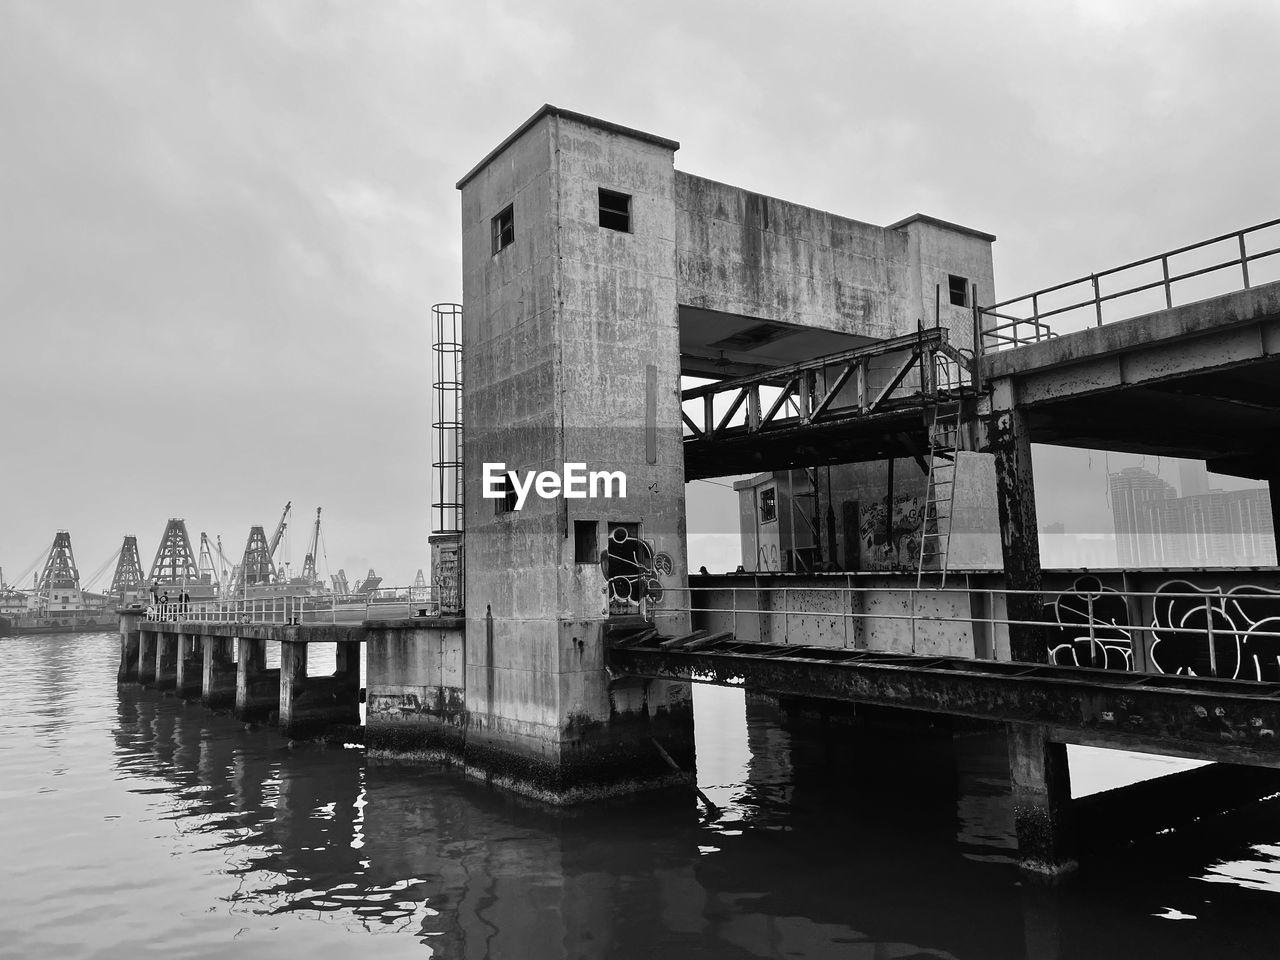 architecture, water, built structure, bridge, sky, black and white, monochrome, monochrome photography, transportation, nature, cloud, building exterior, river, waterway, urban area, reflection, city, travel destinations, cityscape, no people, outdoors, pier, travel, day, building